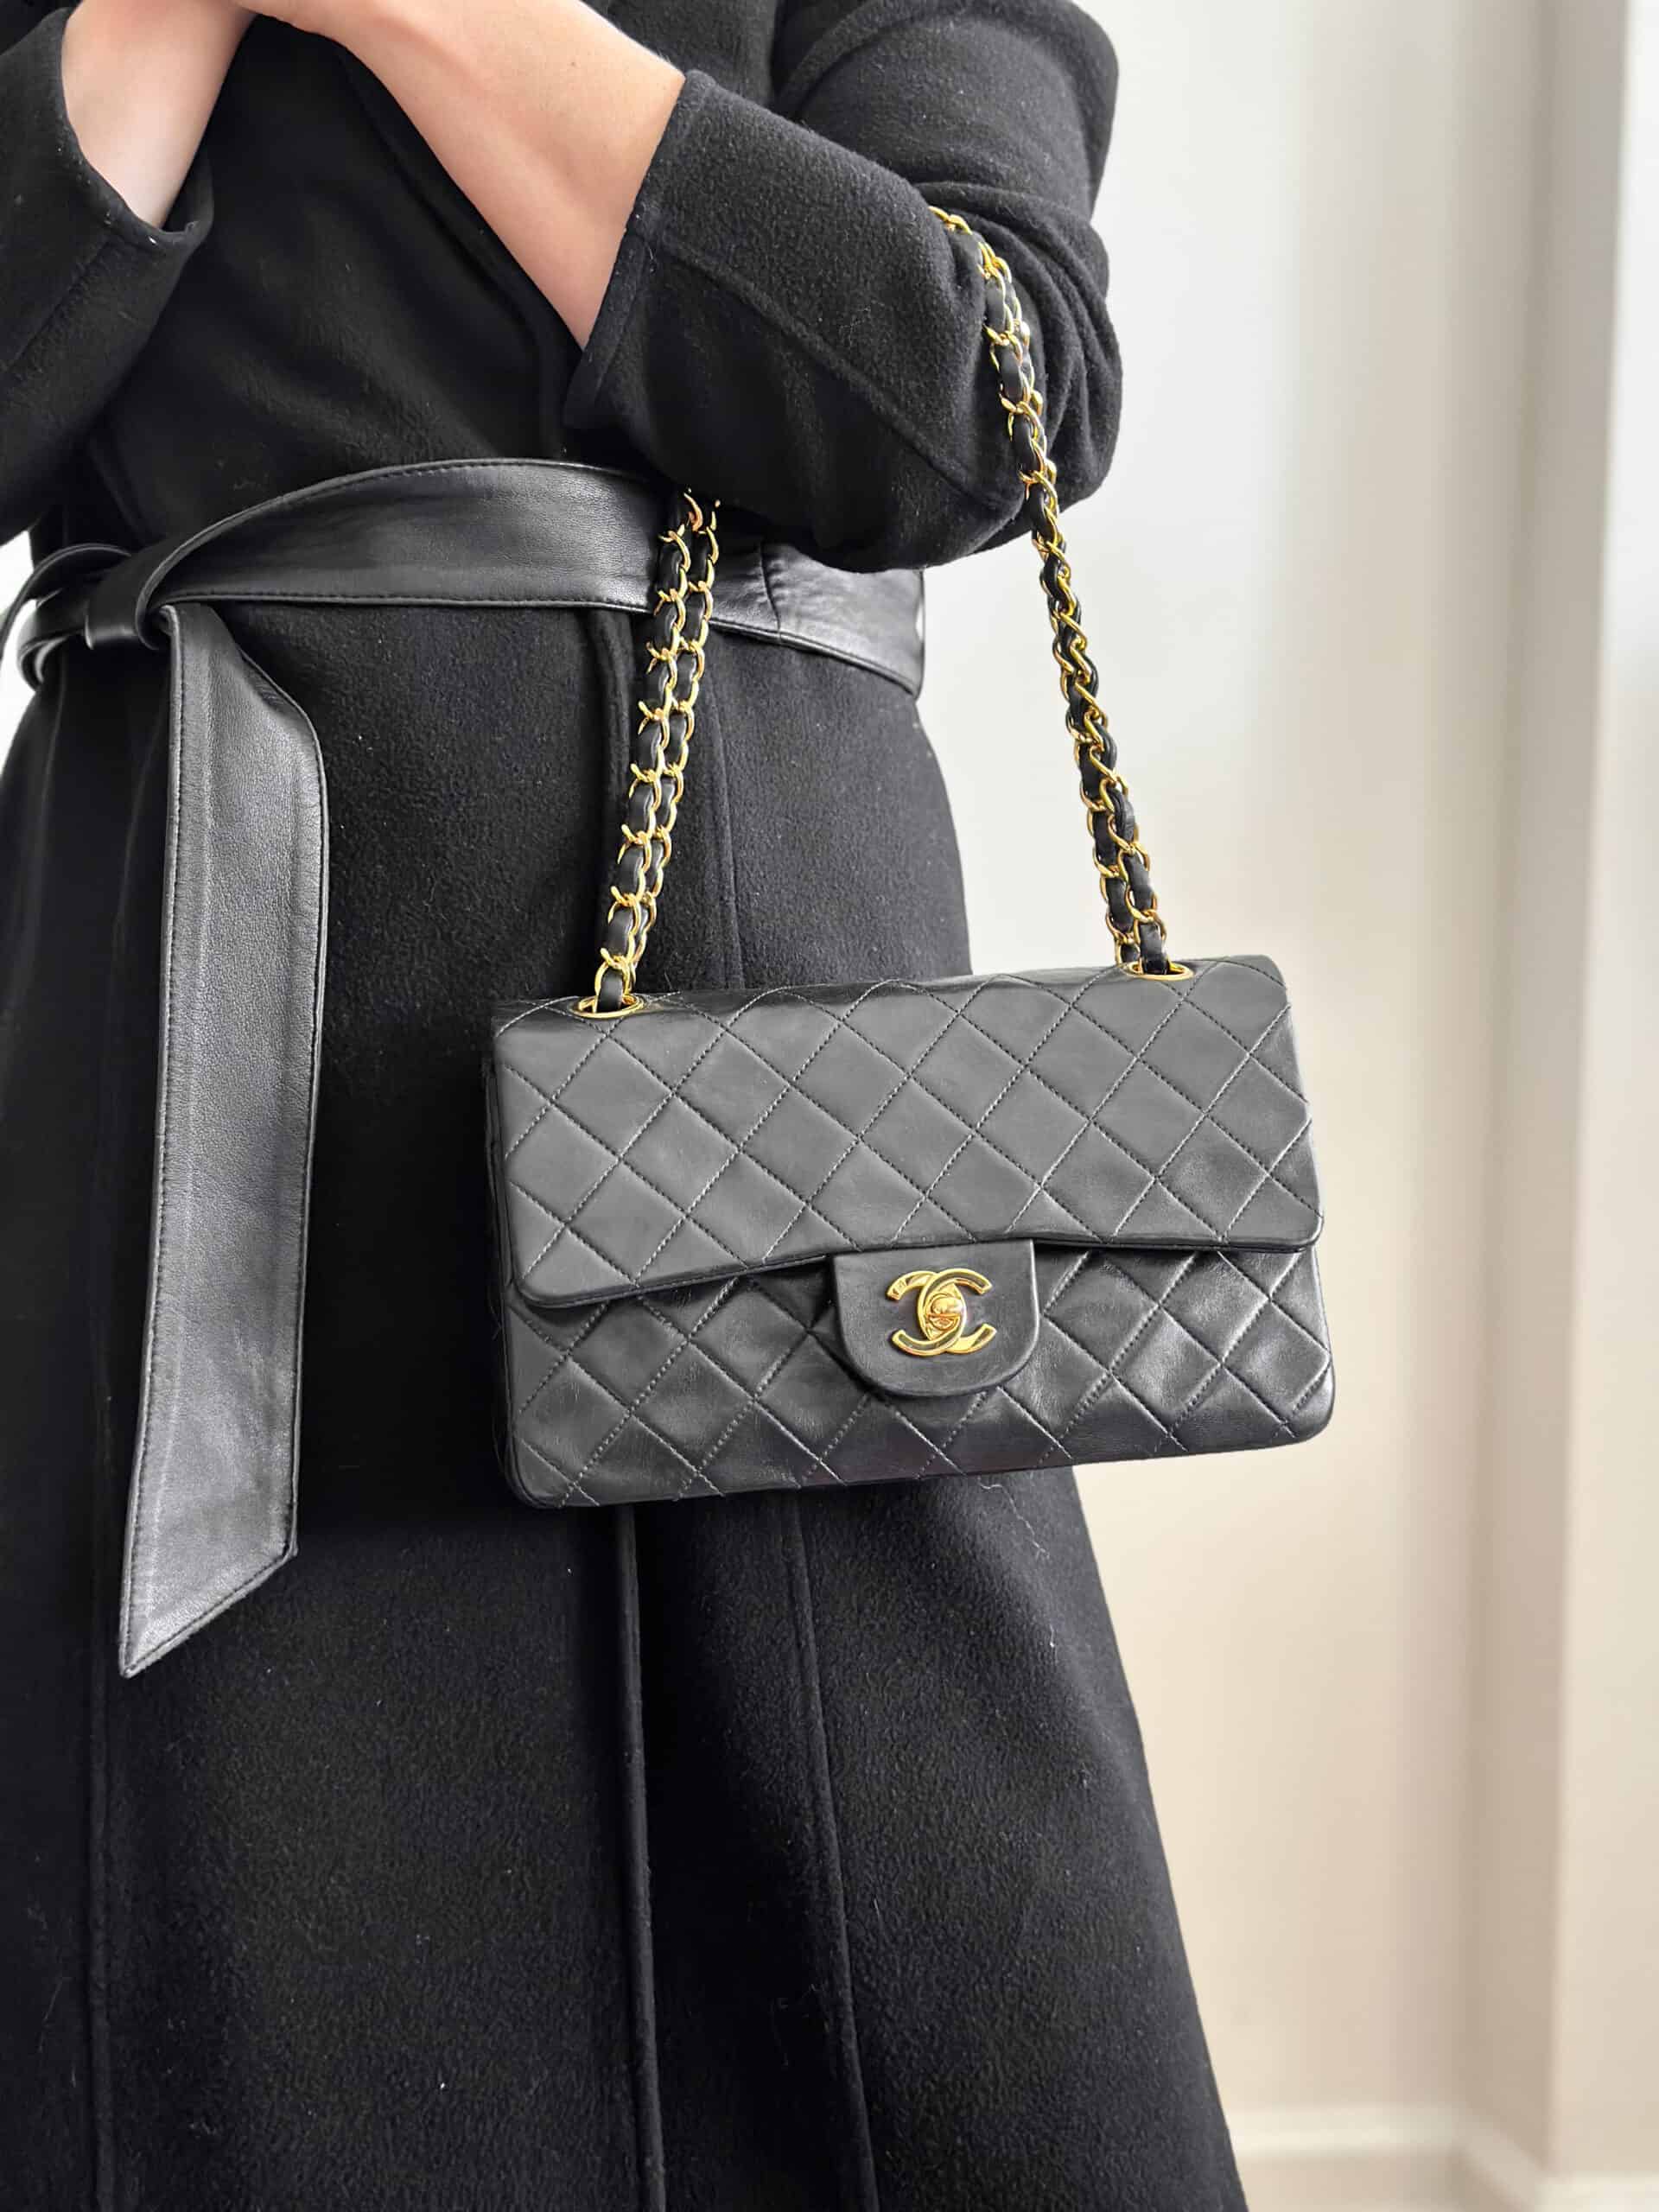 6 Tips When Buying your First Chanel handbag • Petite in Paris